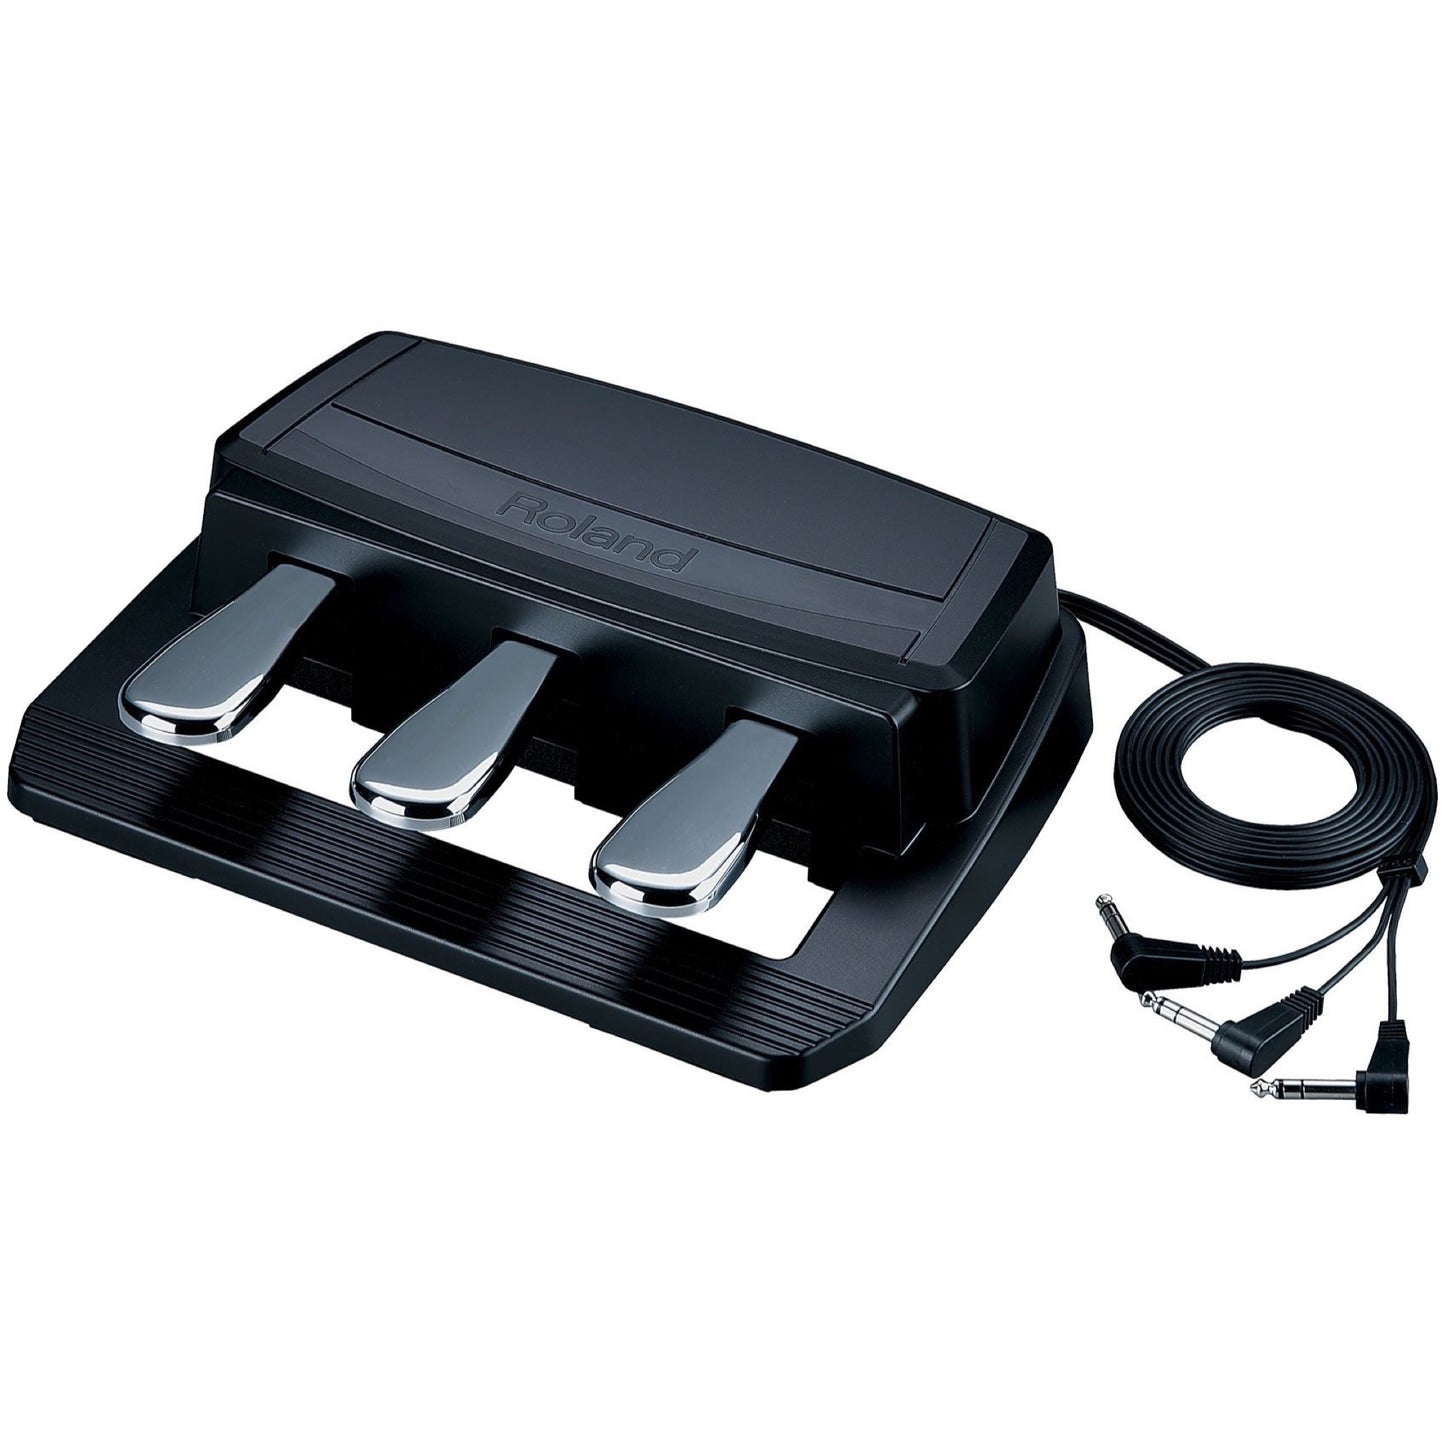 Roland RPU3 Pedal Unit for RD700NX, FP-4F and FP-7F